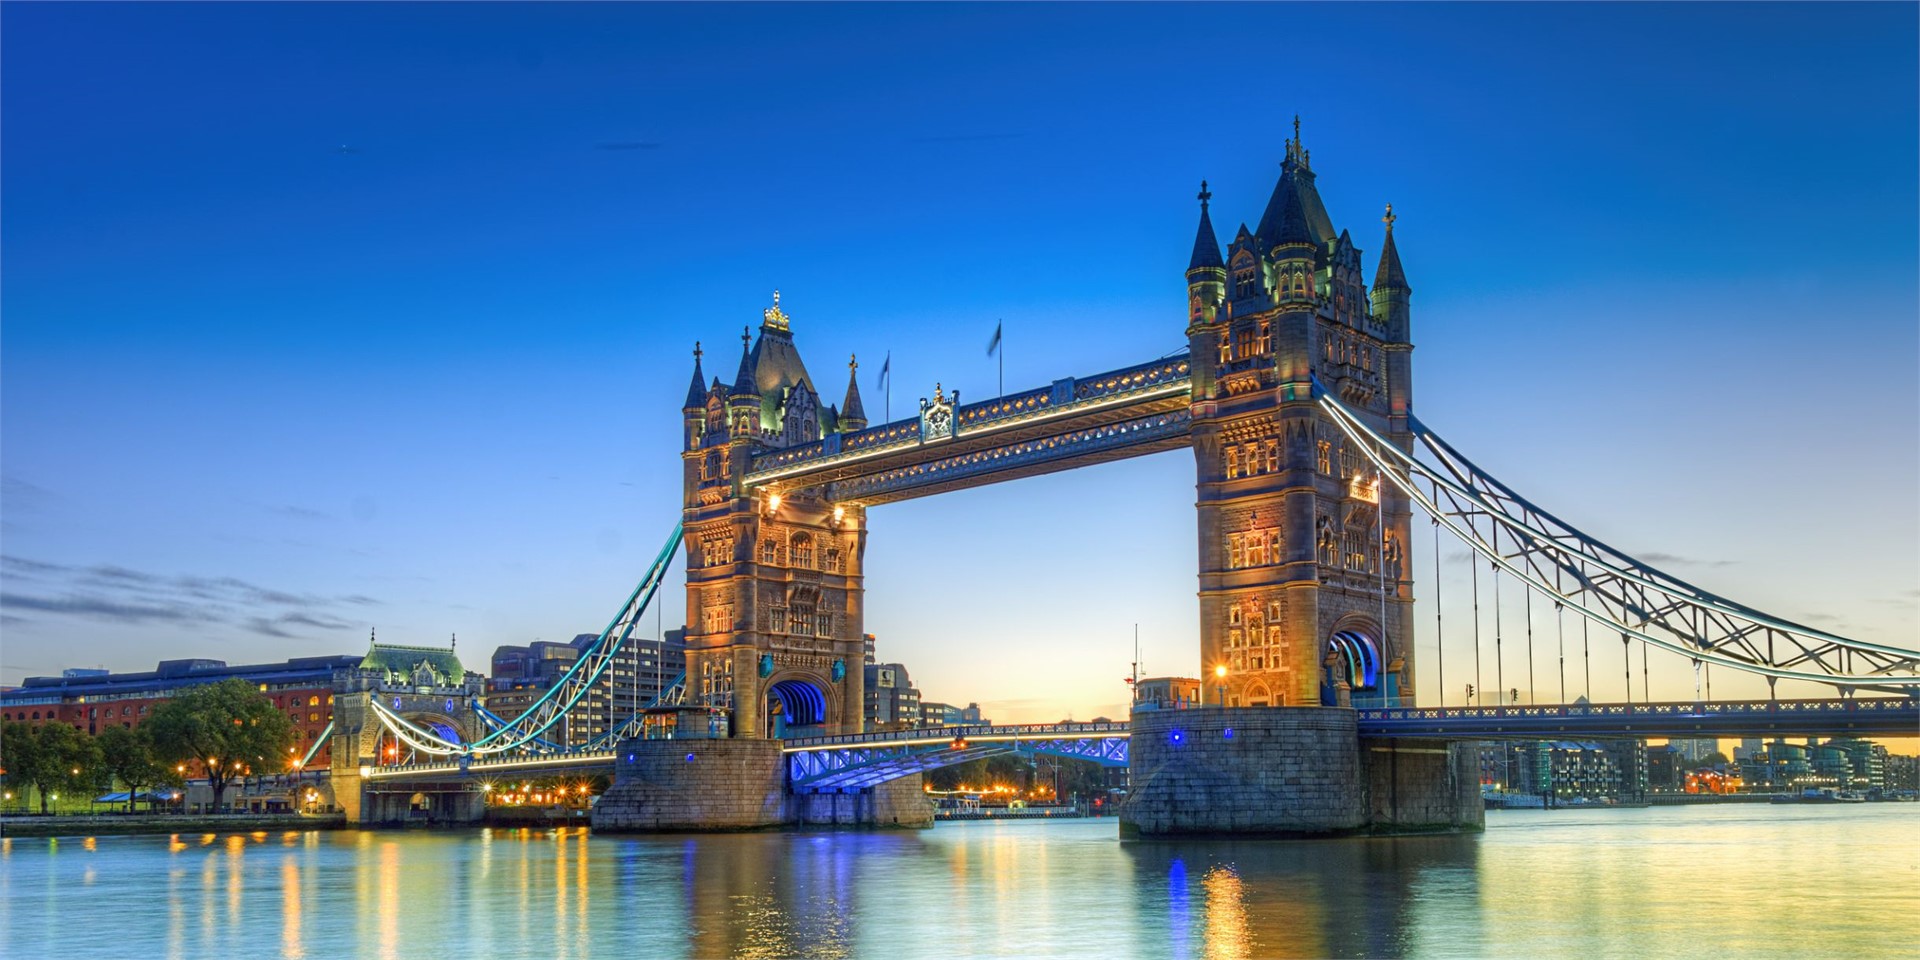 Hotels and accommodation in London, England
